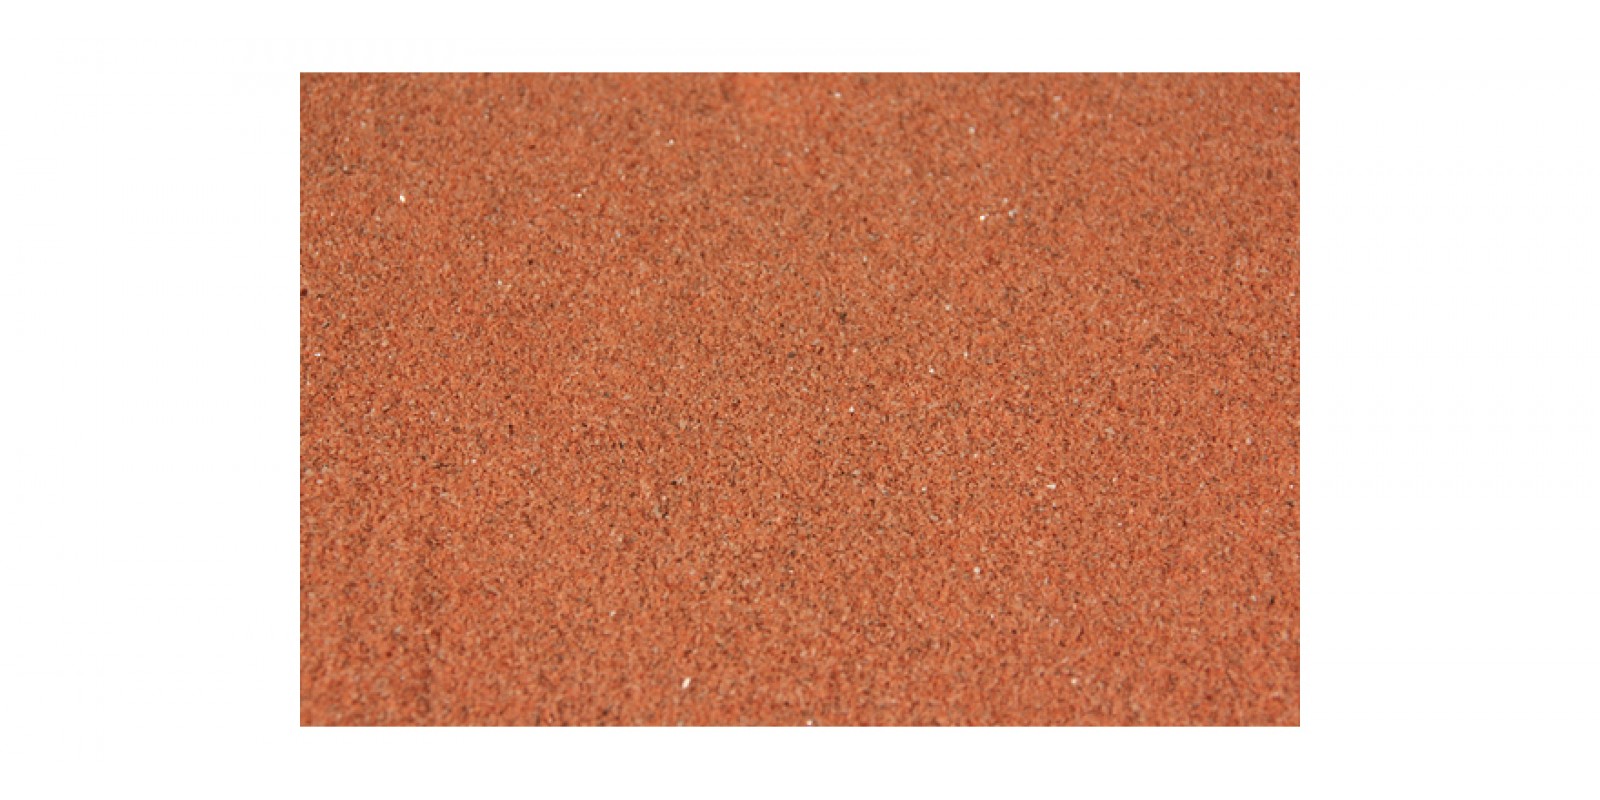 HE33101 STONE GRAVEL RED-BROWN, 0.1 - 0.6 MM, 200 G